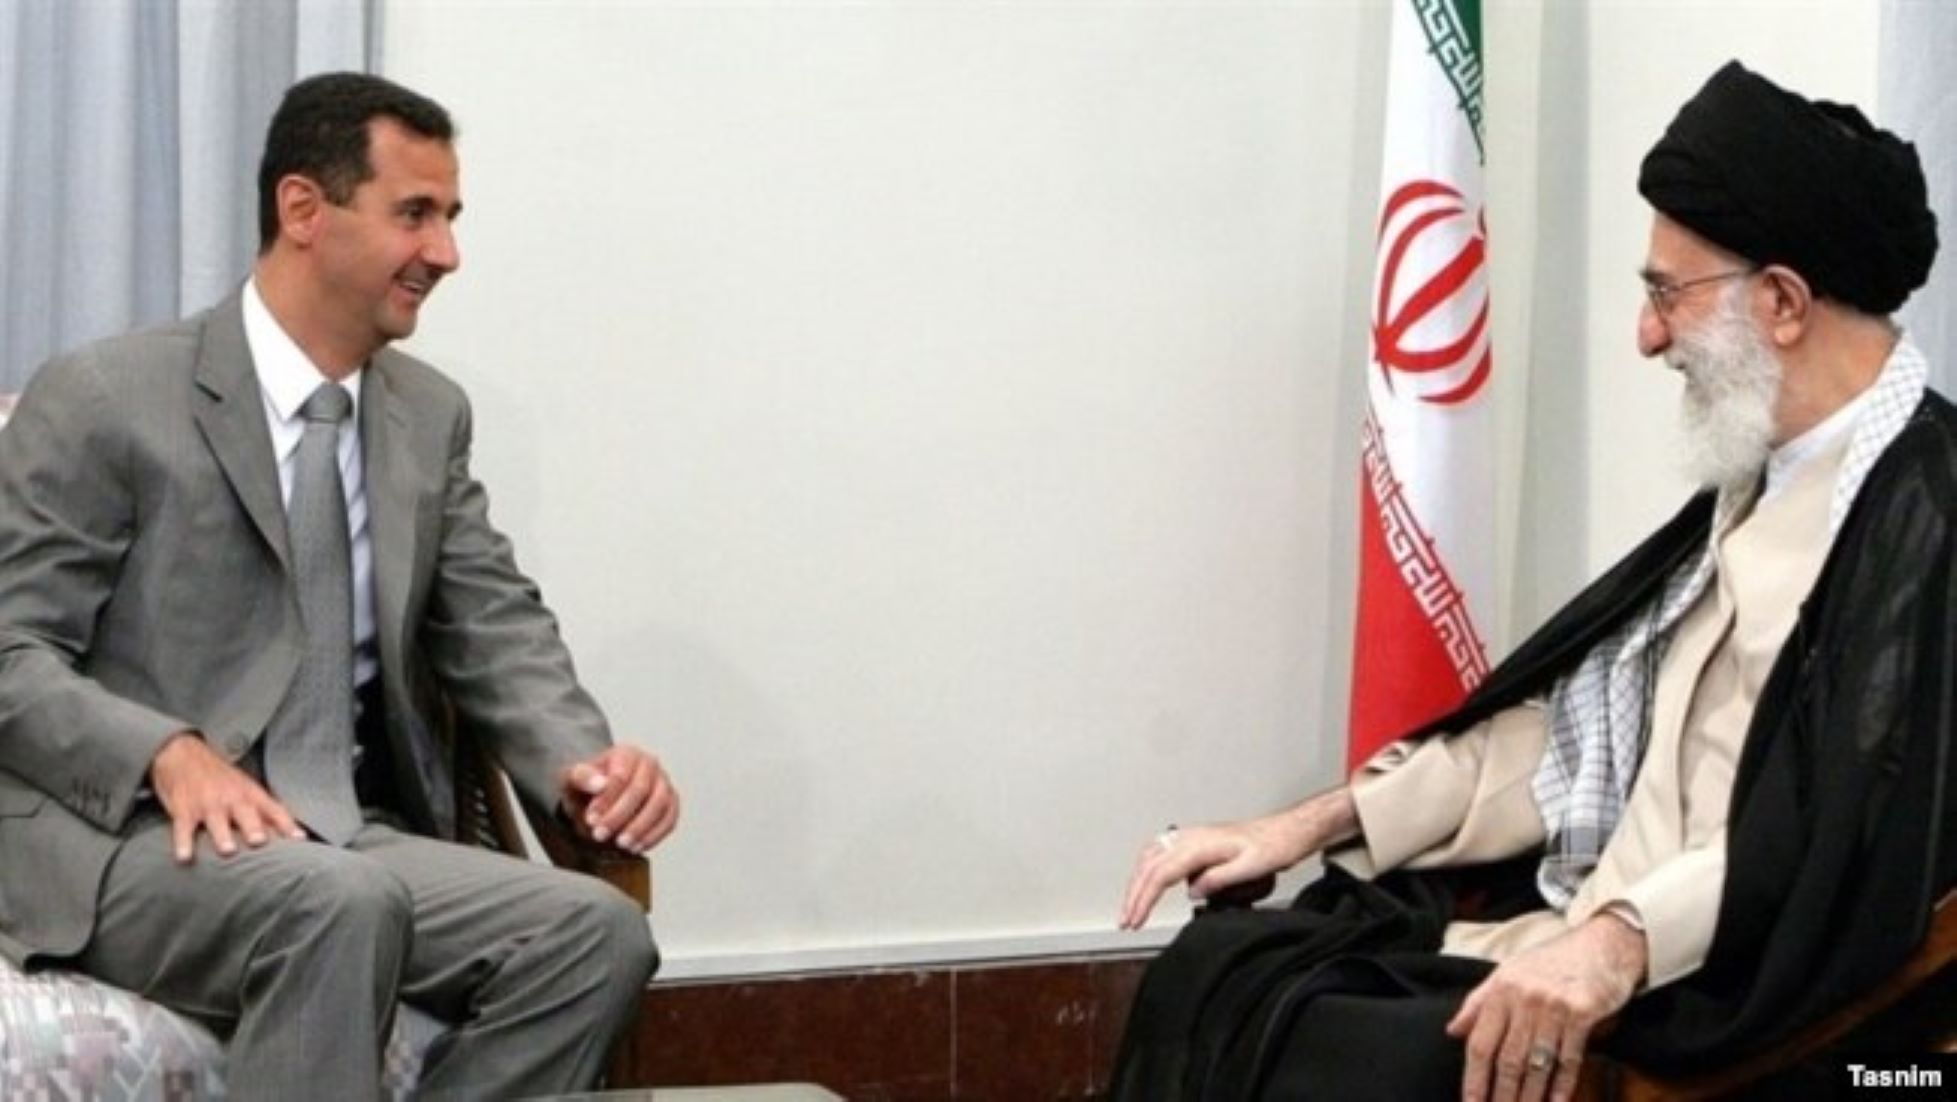 Iran’s Leader Urges Greater Iran-Syria Cooperation To Overcome West’s Pressure